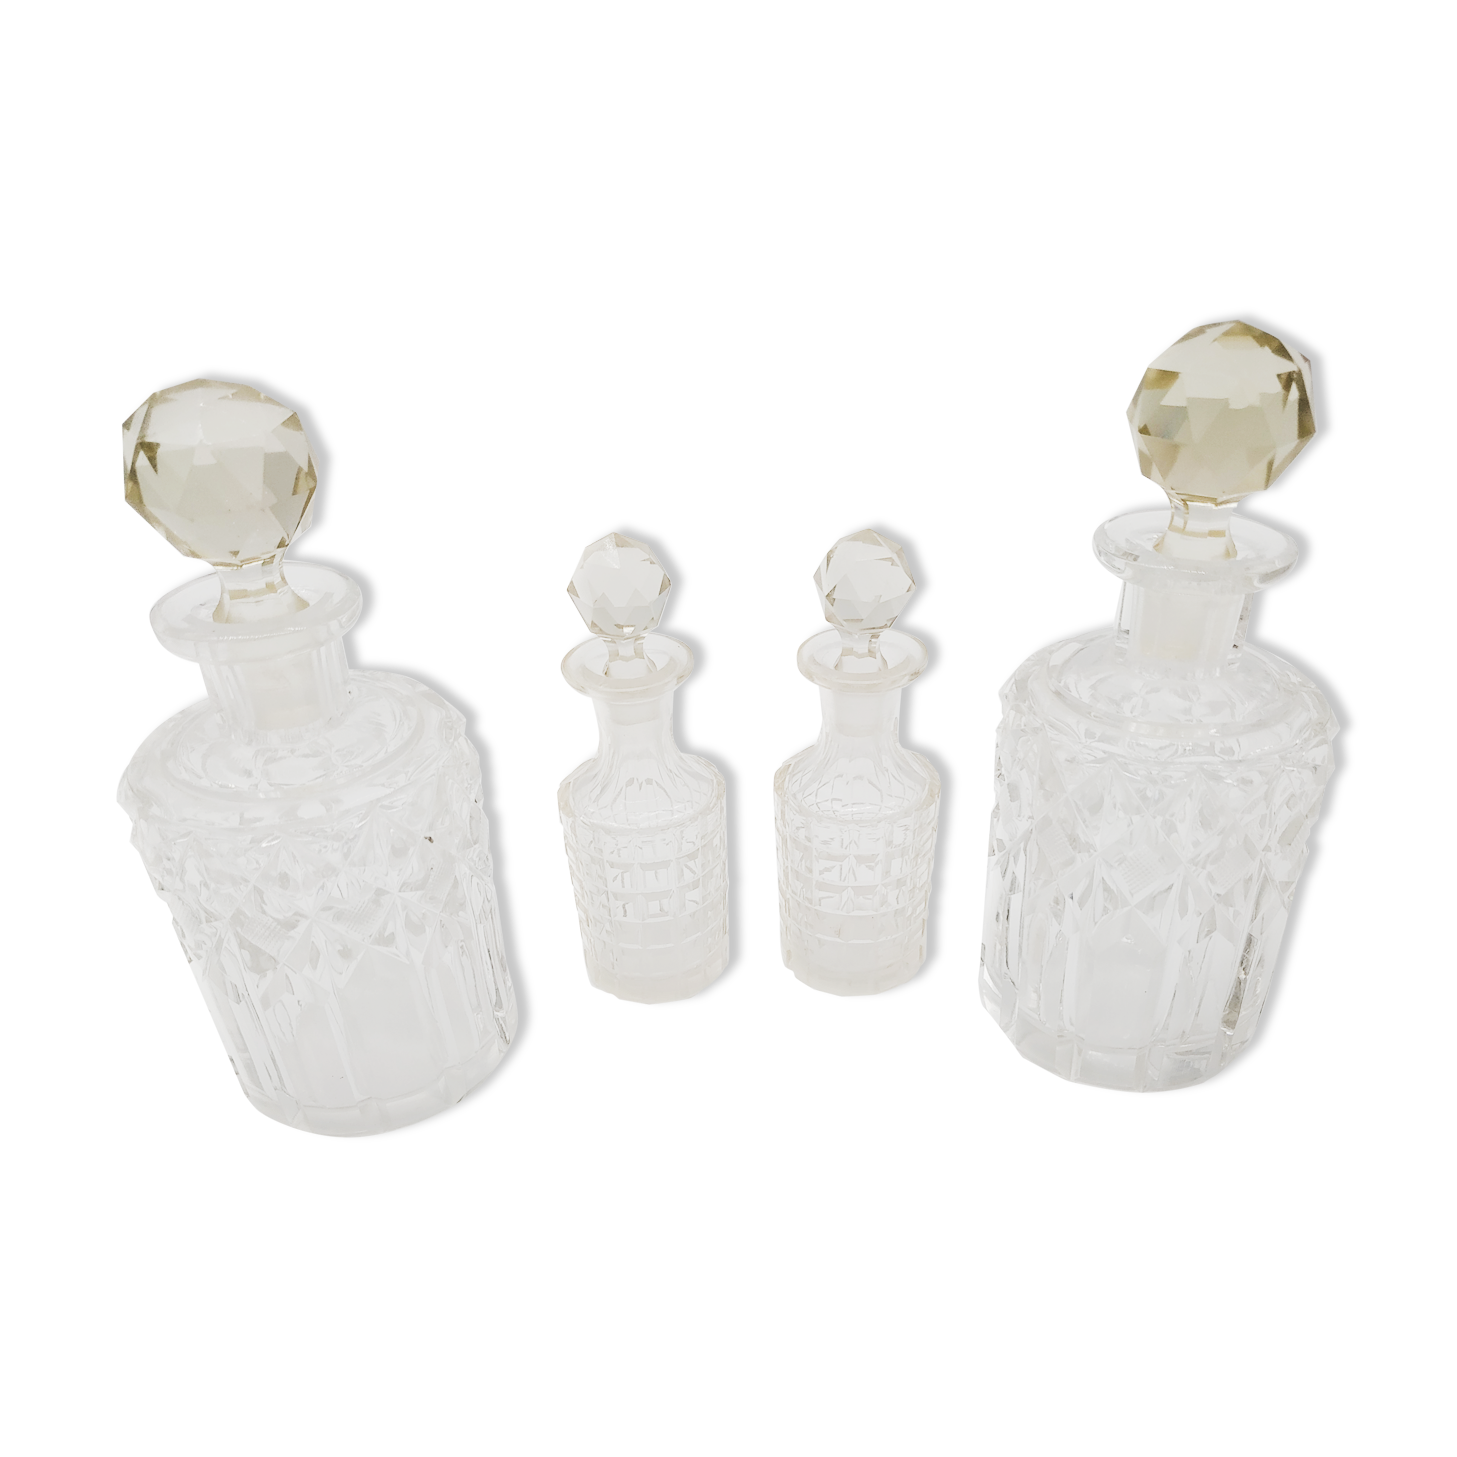 Series of 4 vials in baccarat crystal France